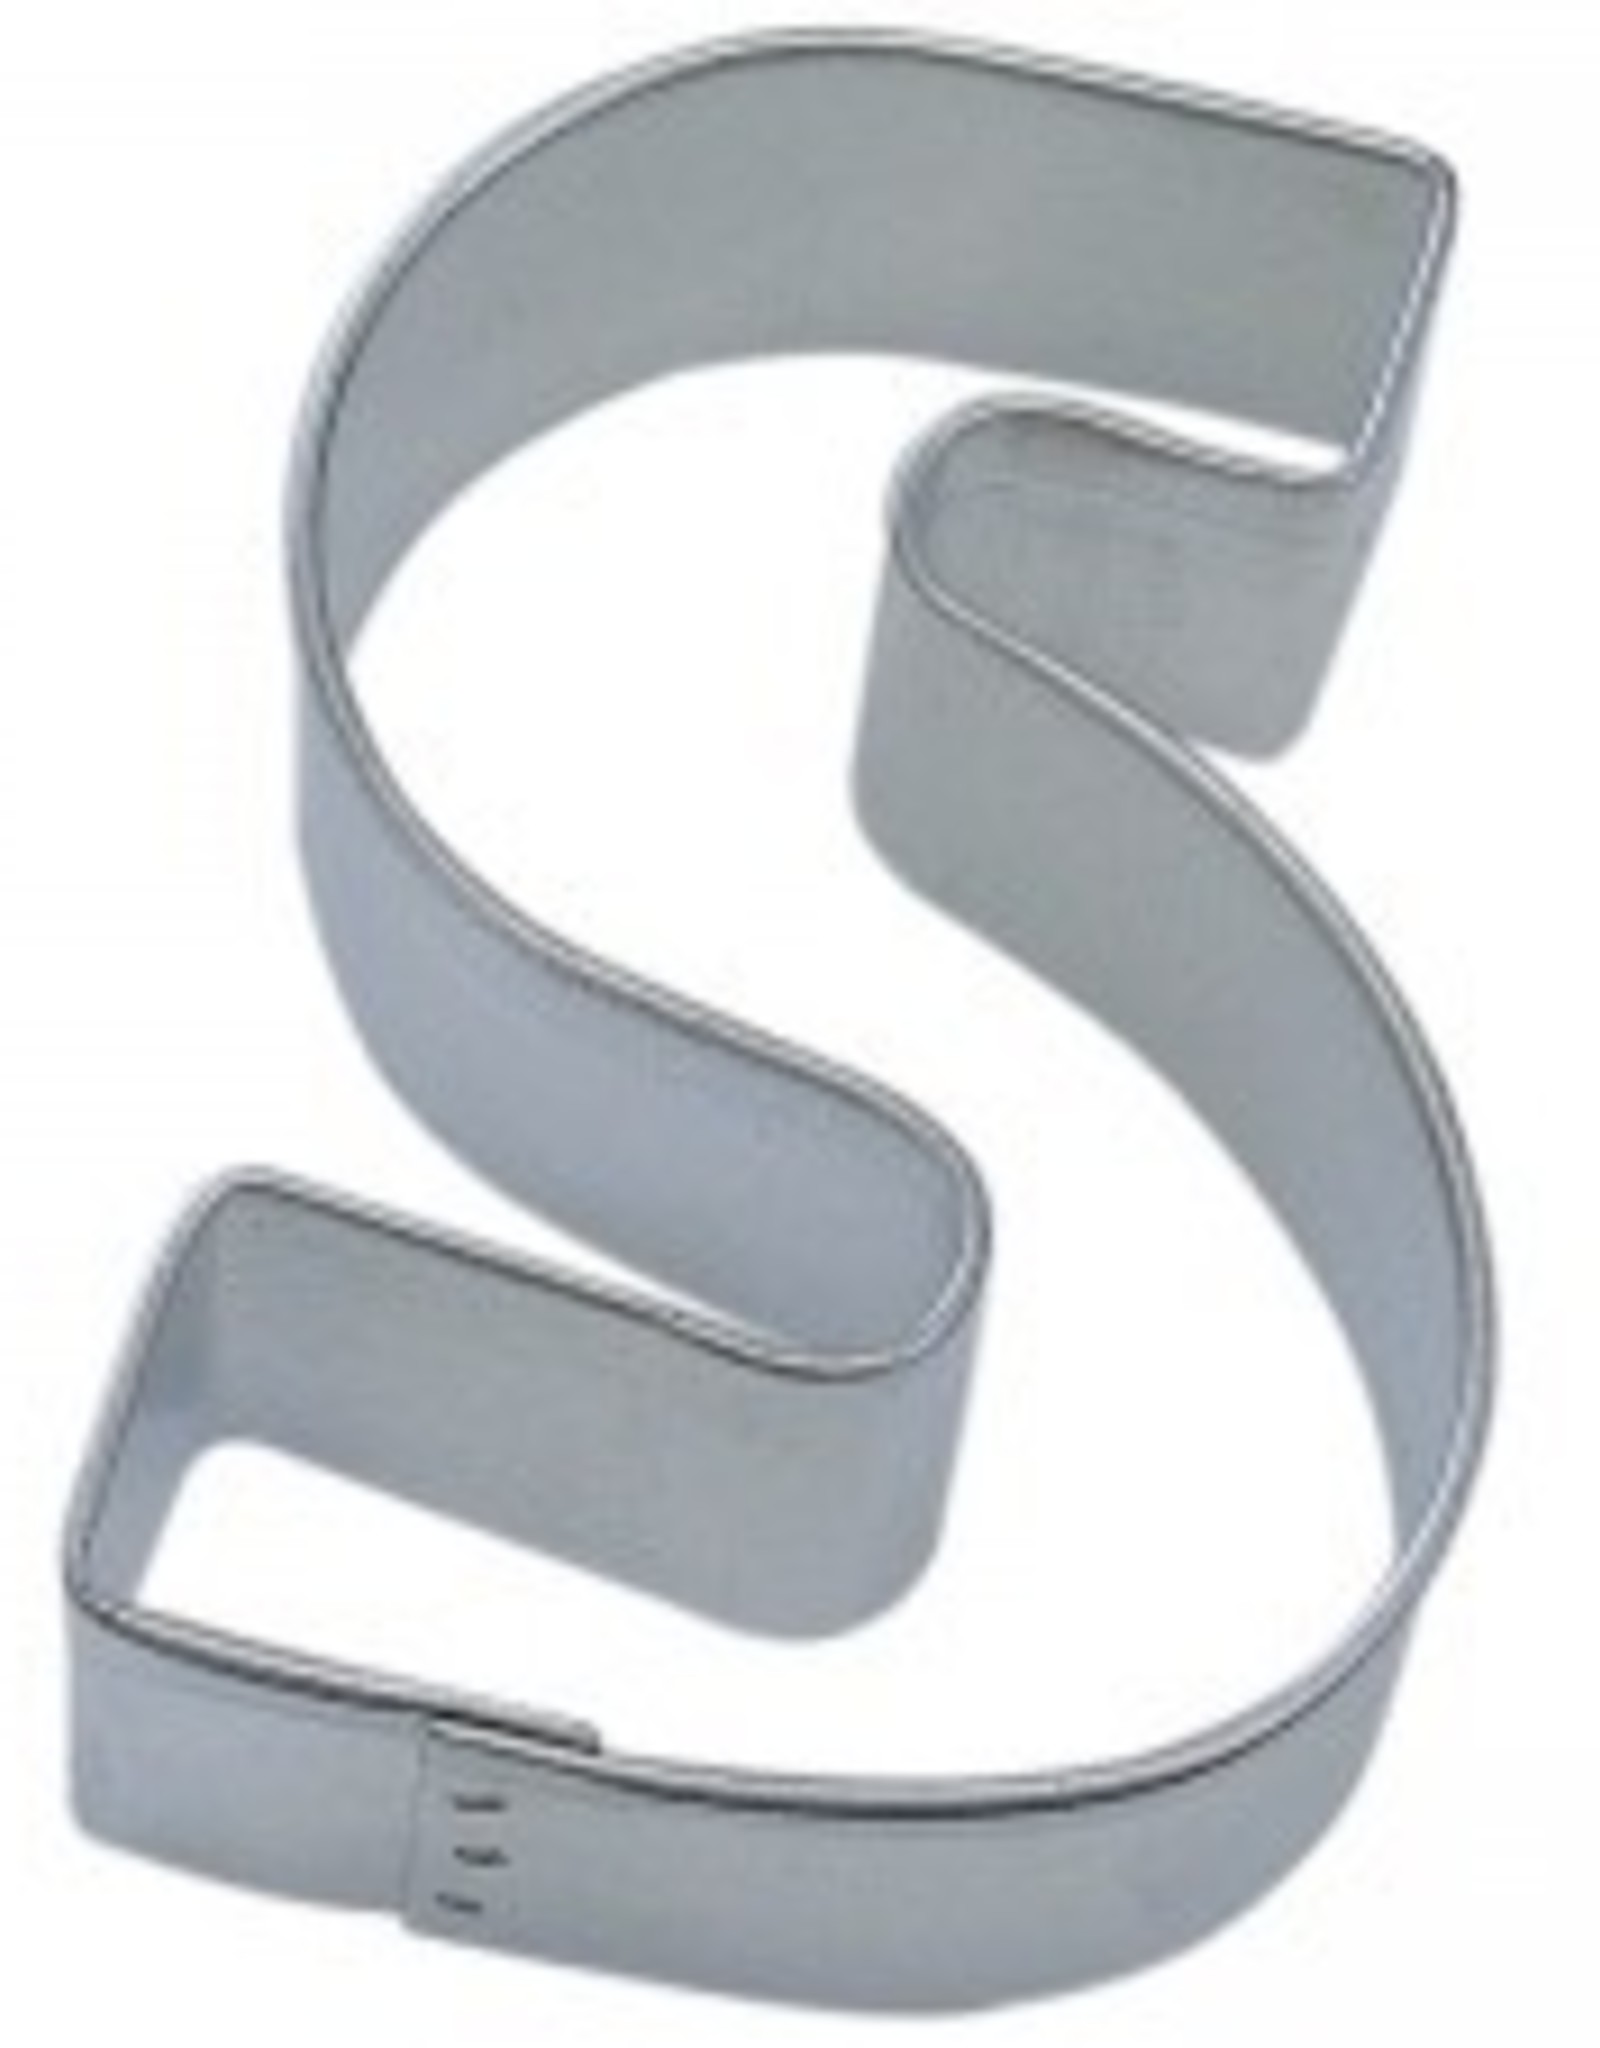 Letter "S" Cookie Cutter